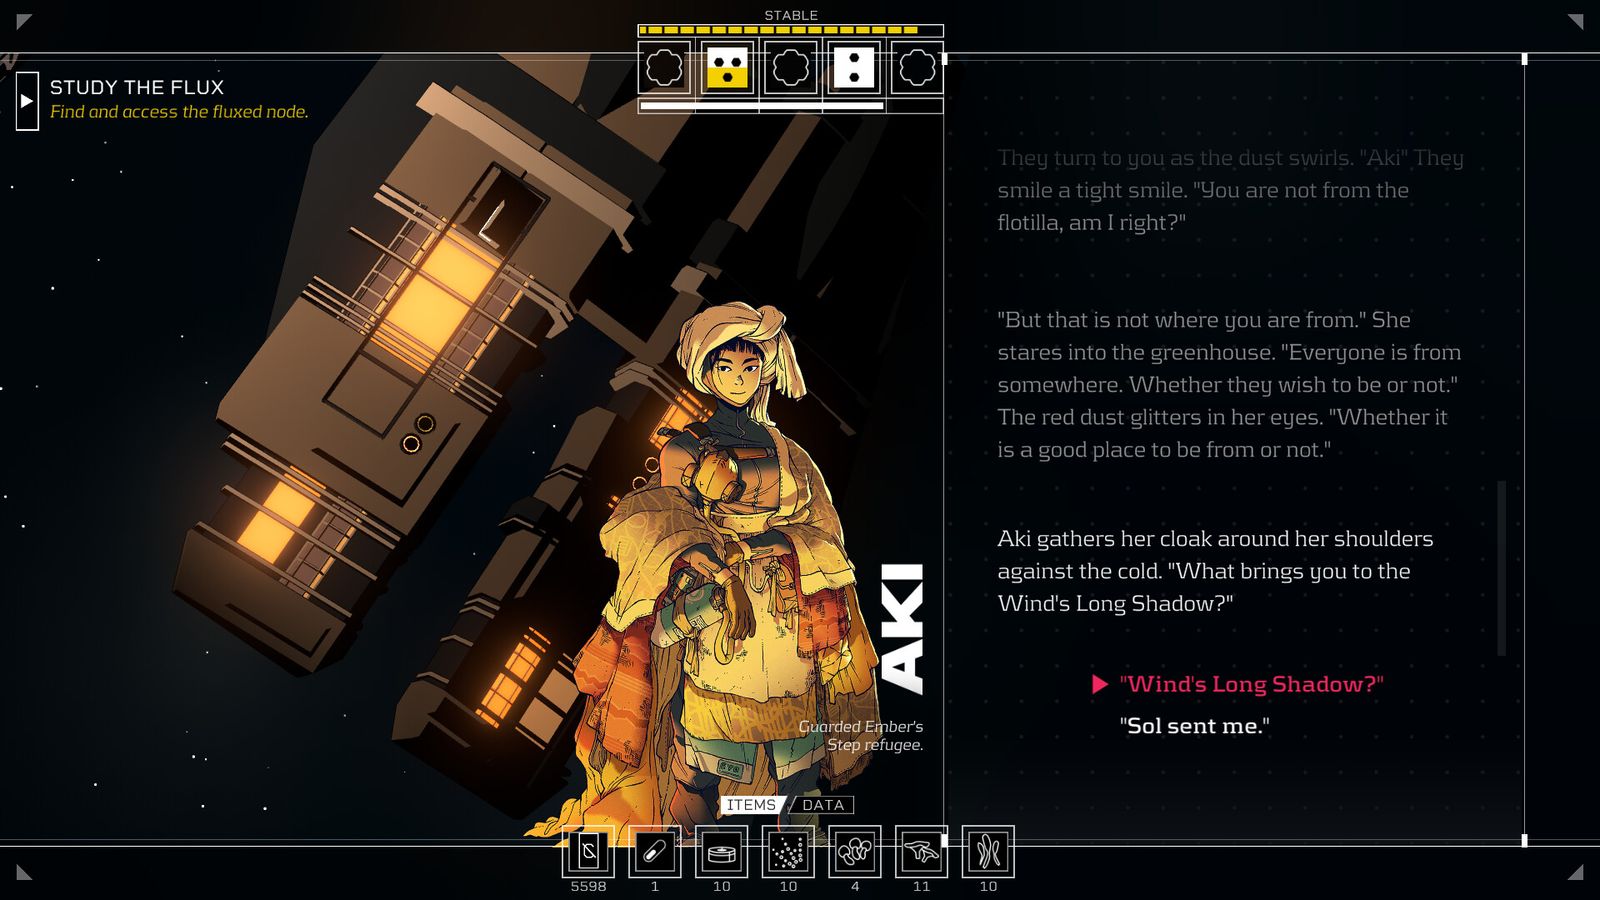 a gameplay screen from citizen sleeper showing the character Aki